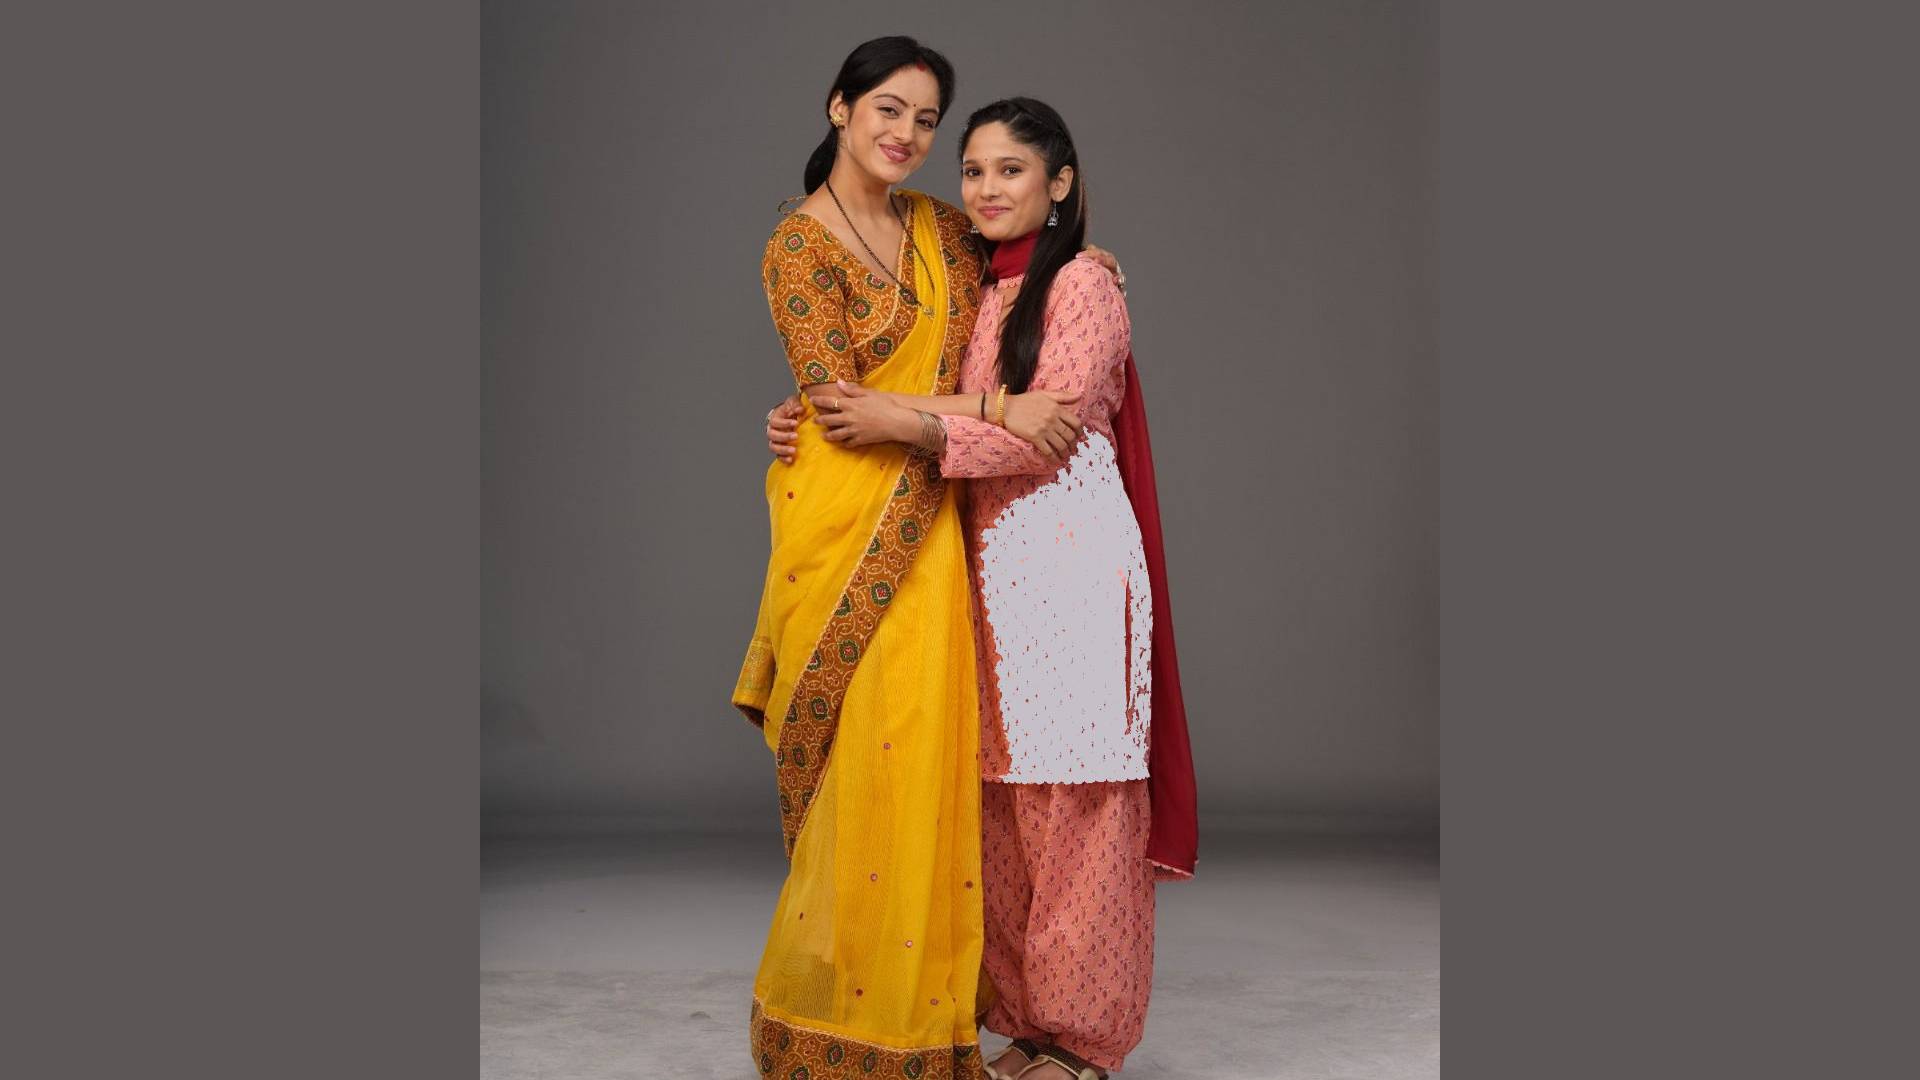 Sanika Amit’s take on COLORS’ ‘Mangal Lakshmi’: “The biggest win is the show inspiring women to find strength and love”